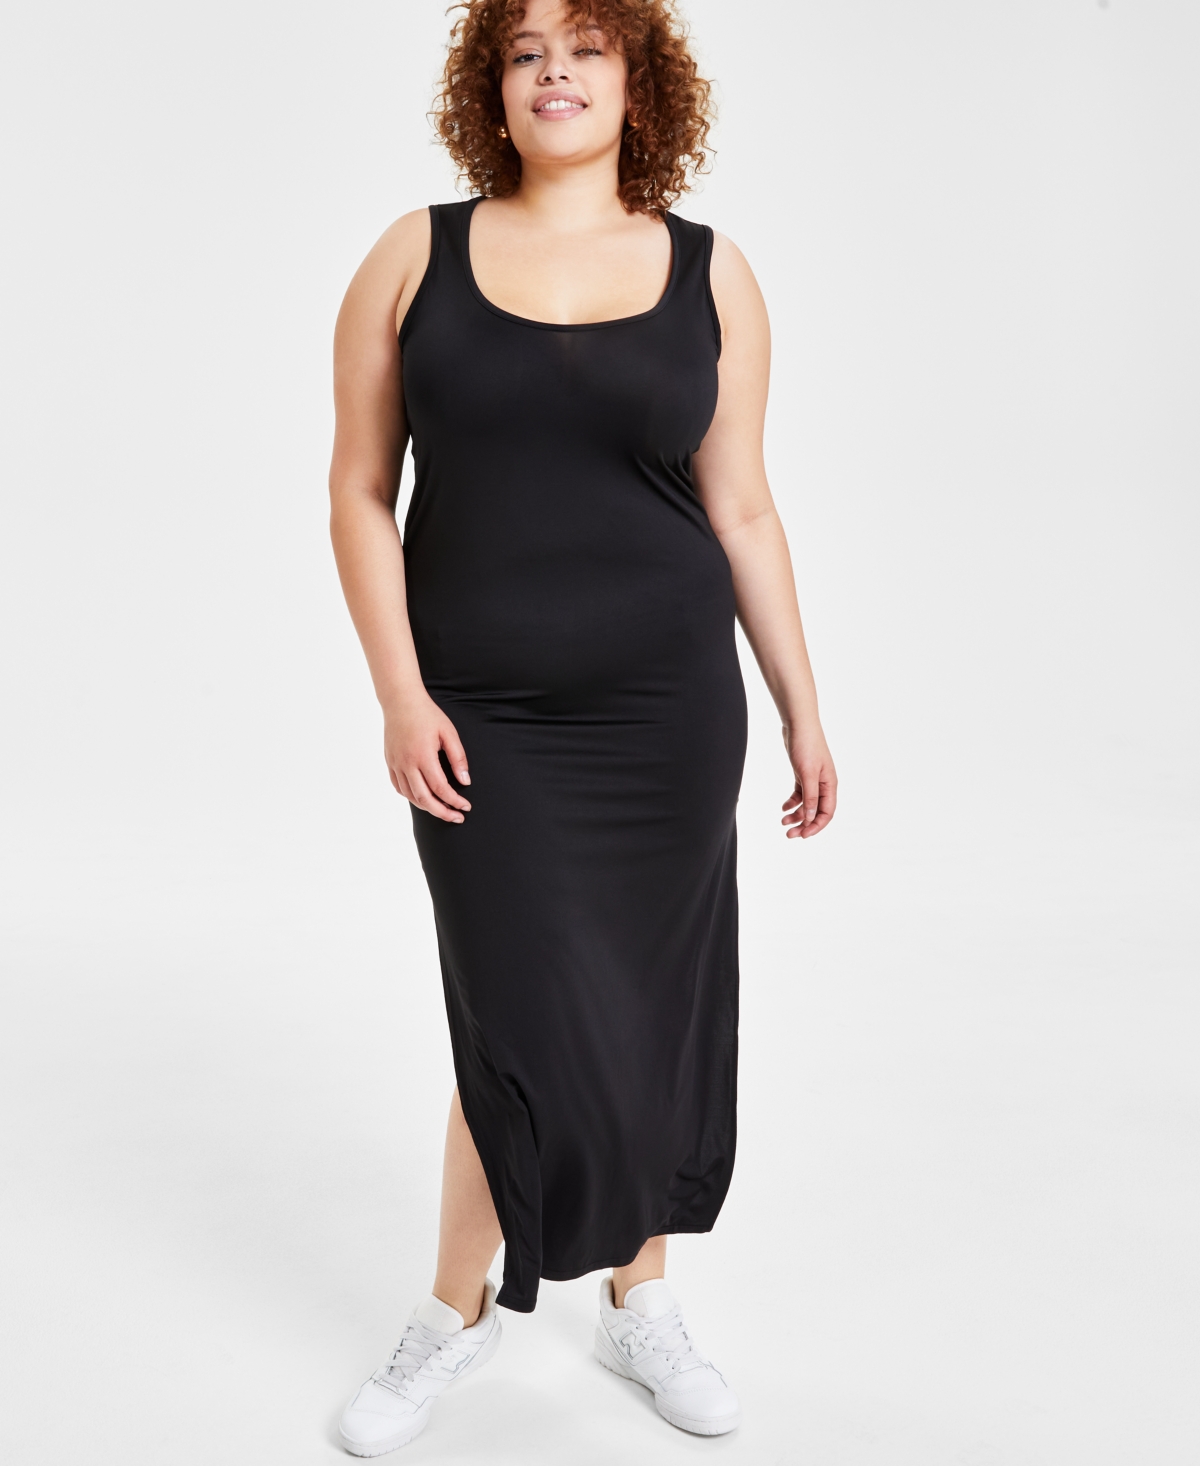 Full Circle Trends Trendy Plus Size Scoop-neck Sleeveless Maxi Dress In Black Beauty